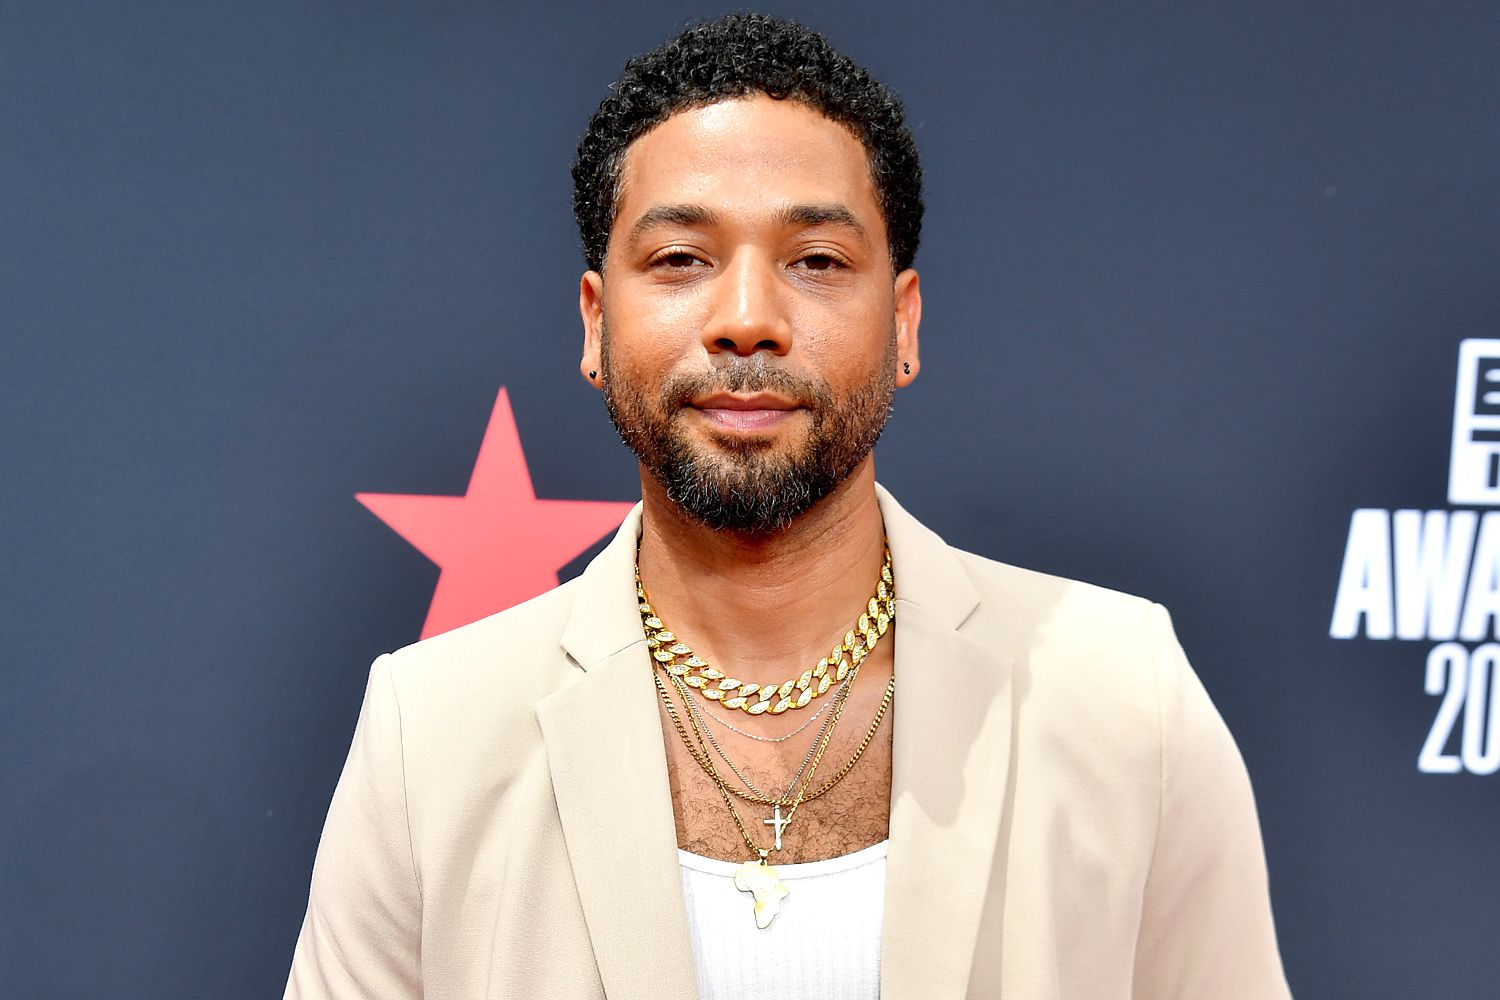 Jussie Smollett Successfully Completes 5-Month Outpatient Treatment Program